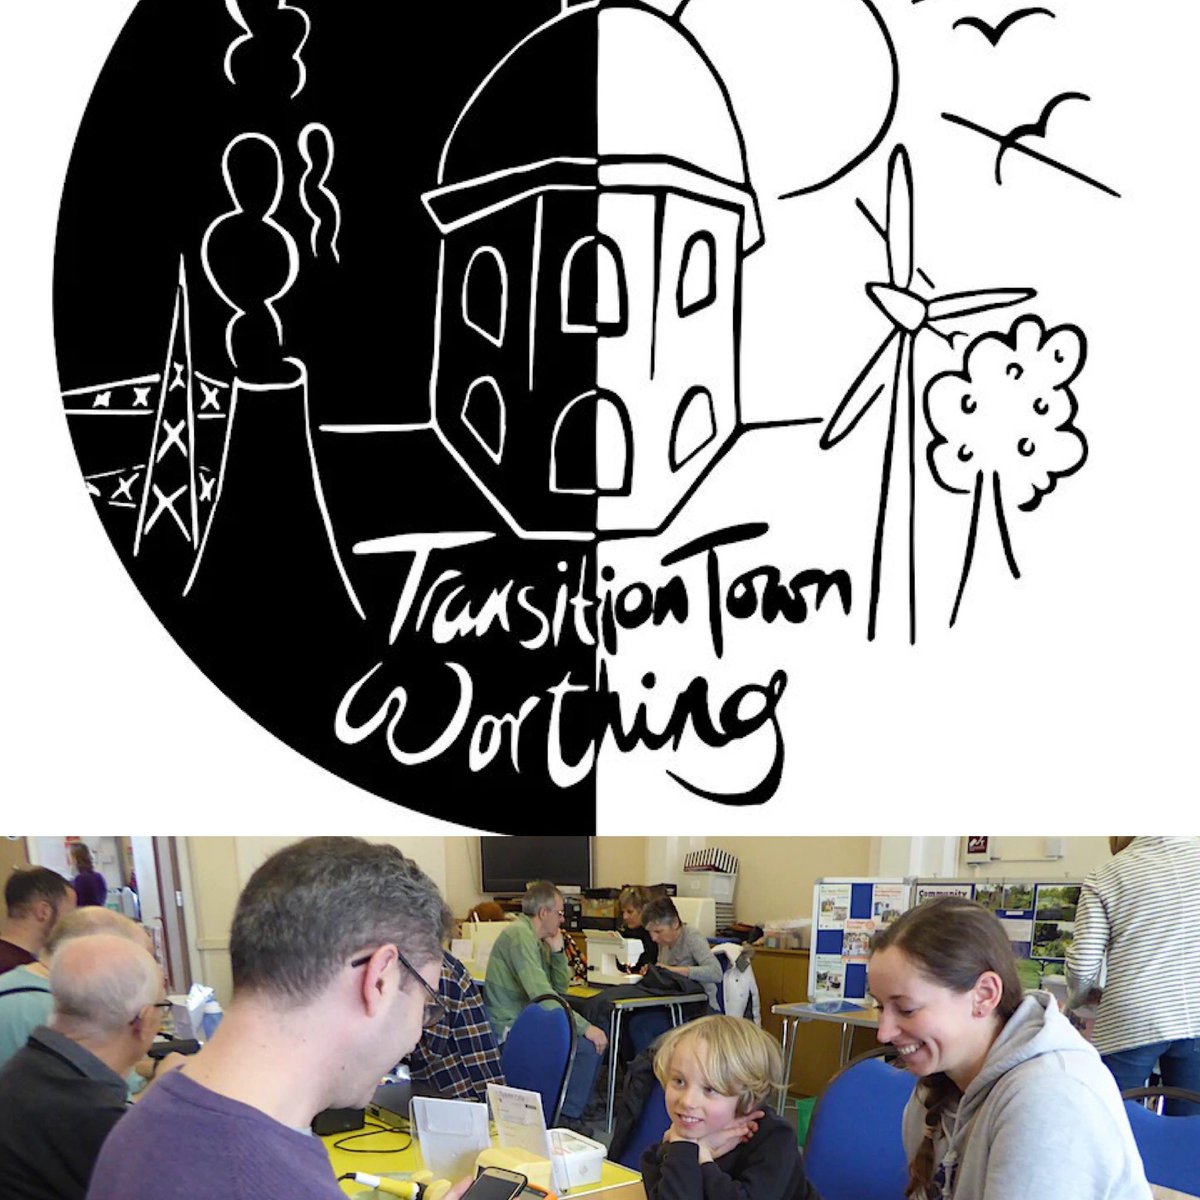 👉👉 Wed 22nd March, 17:30 👈👈

Come and find out about Transition Town Worthing, what they get up to locally and how they can help you

Book your free spot on EventBrite: eventbrite.co.uk/e/579463780767

#Worthing #TransitionTowns